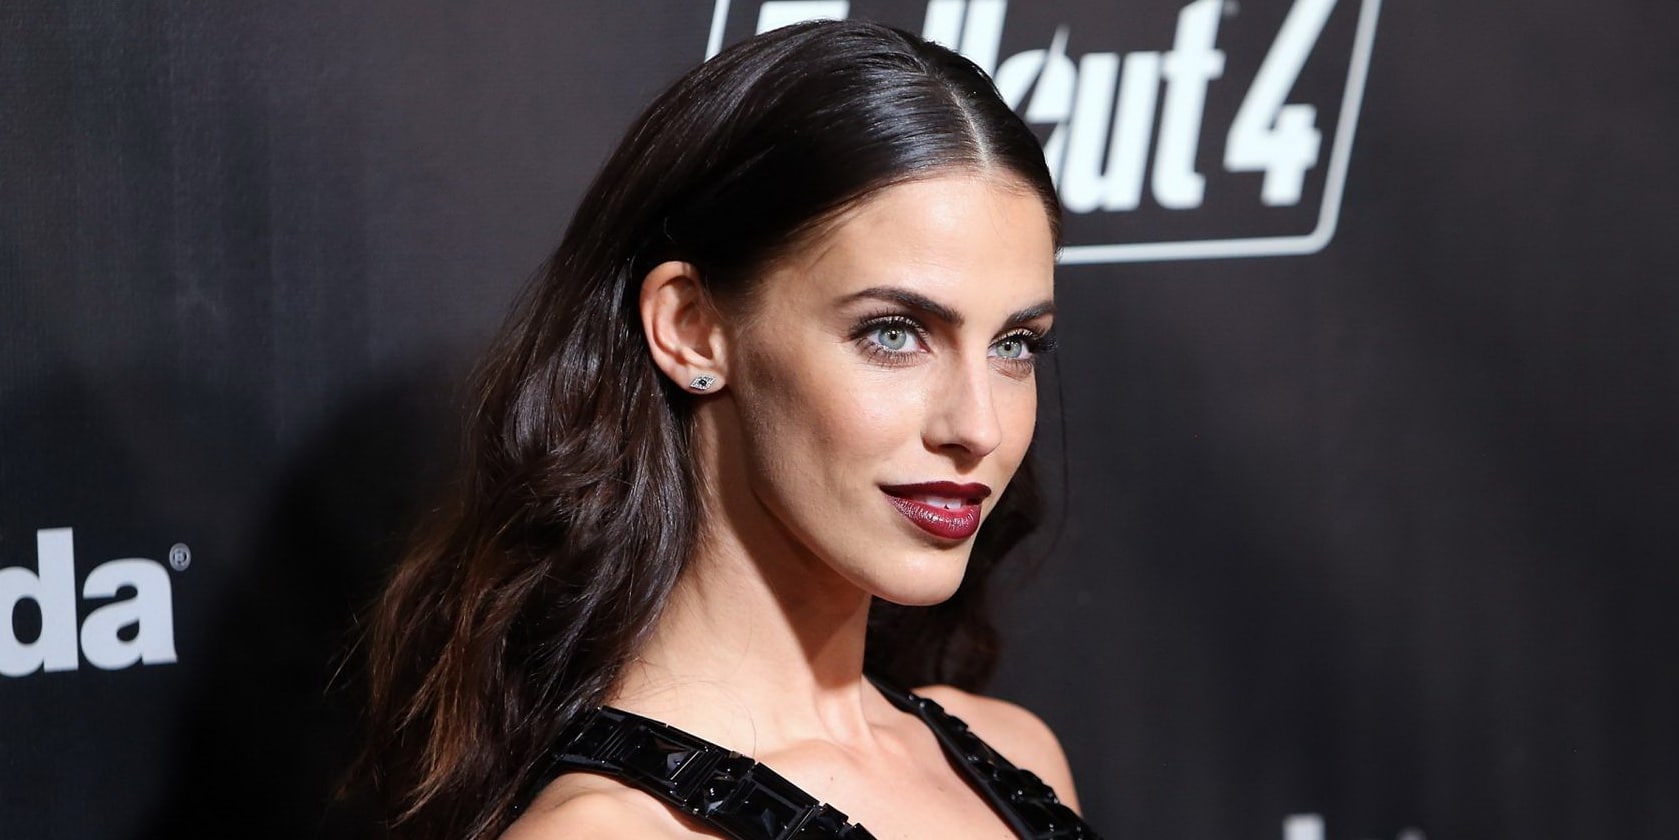 Who Is Actress Jessica Lowndes Wiki Husband Net Worth Jon Lovitz Actress jessica lowndes sits down with debbie and cameron to talk about her upcoming hallmark channel original movie, christmas at pemberley manor. who is actress jessica lowndes wiki